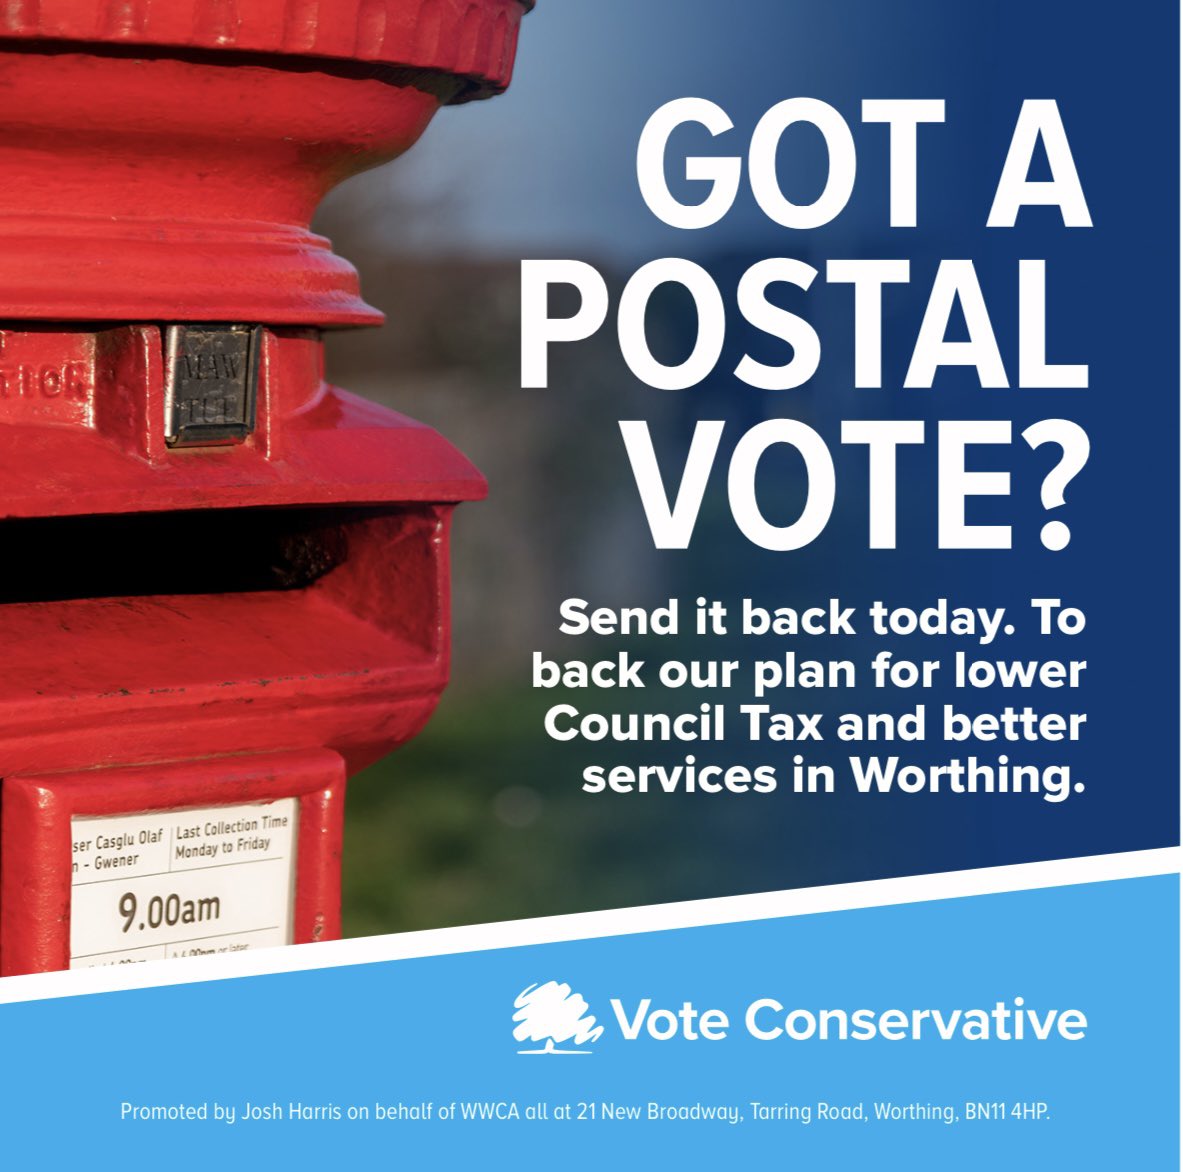 Have you got a postal vote? Send it back today to back our plan for better services in Worthing.